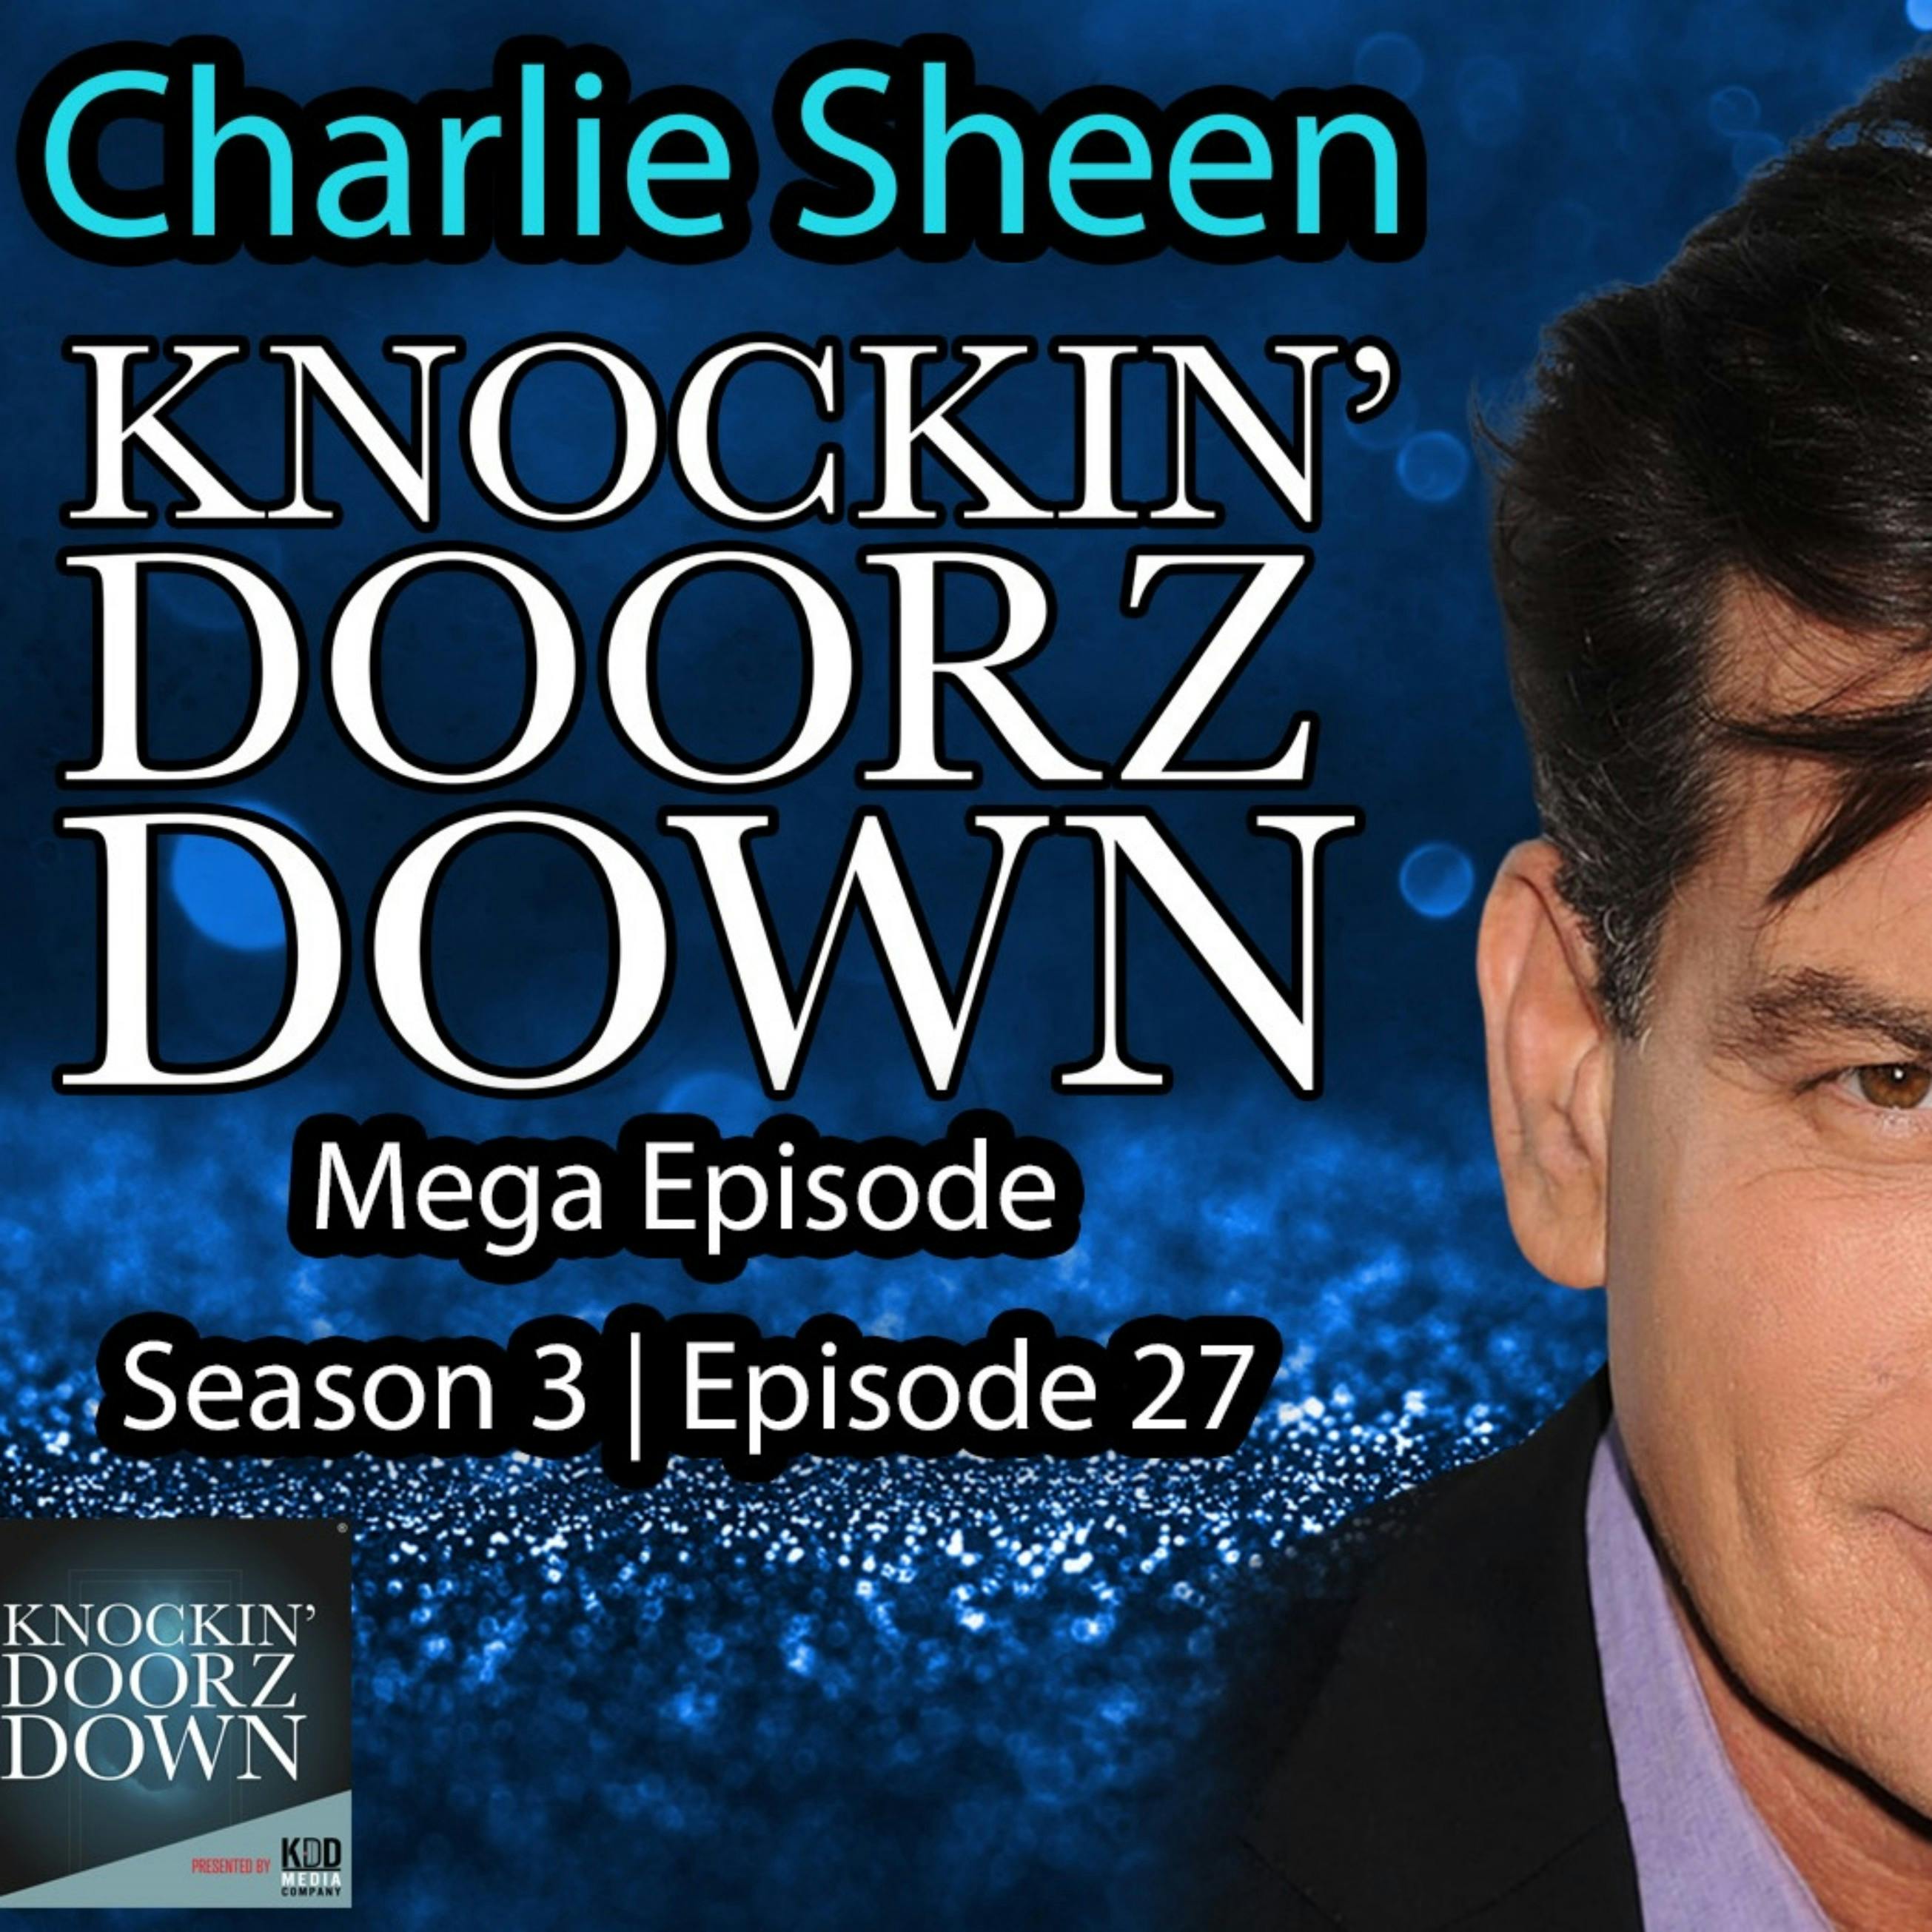 Charlie Sheen | Mega Episode, Addiction Recovery, Sobriety, HIV Awareness, Two And a Half Men & More